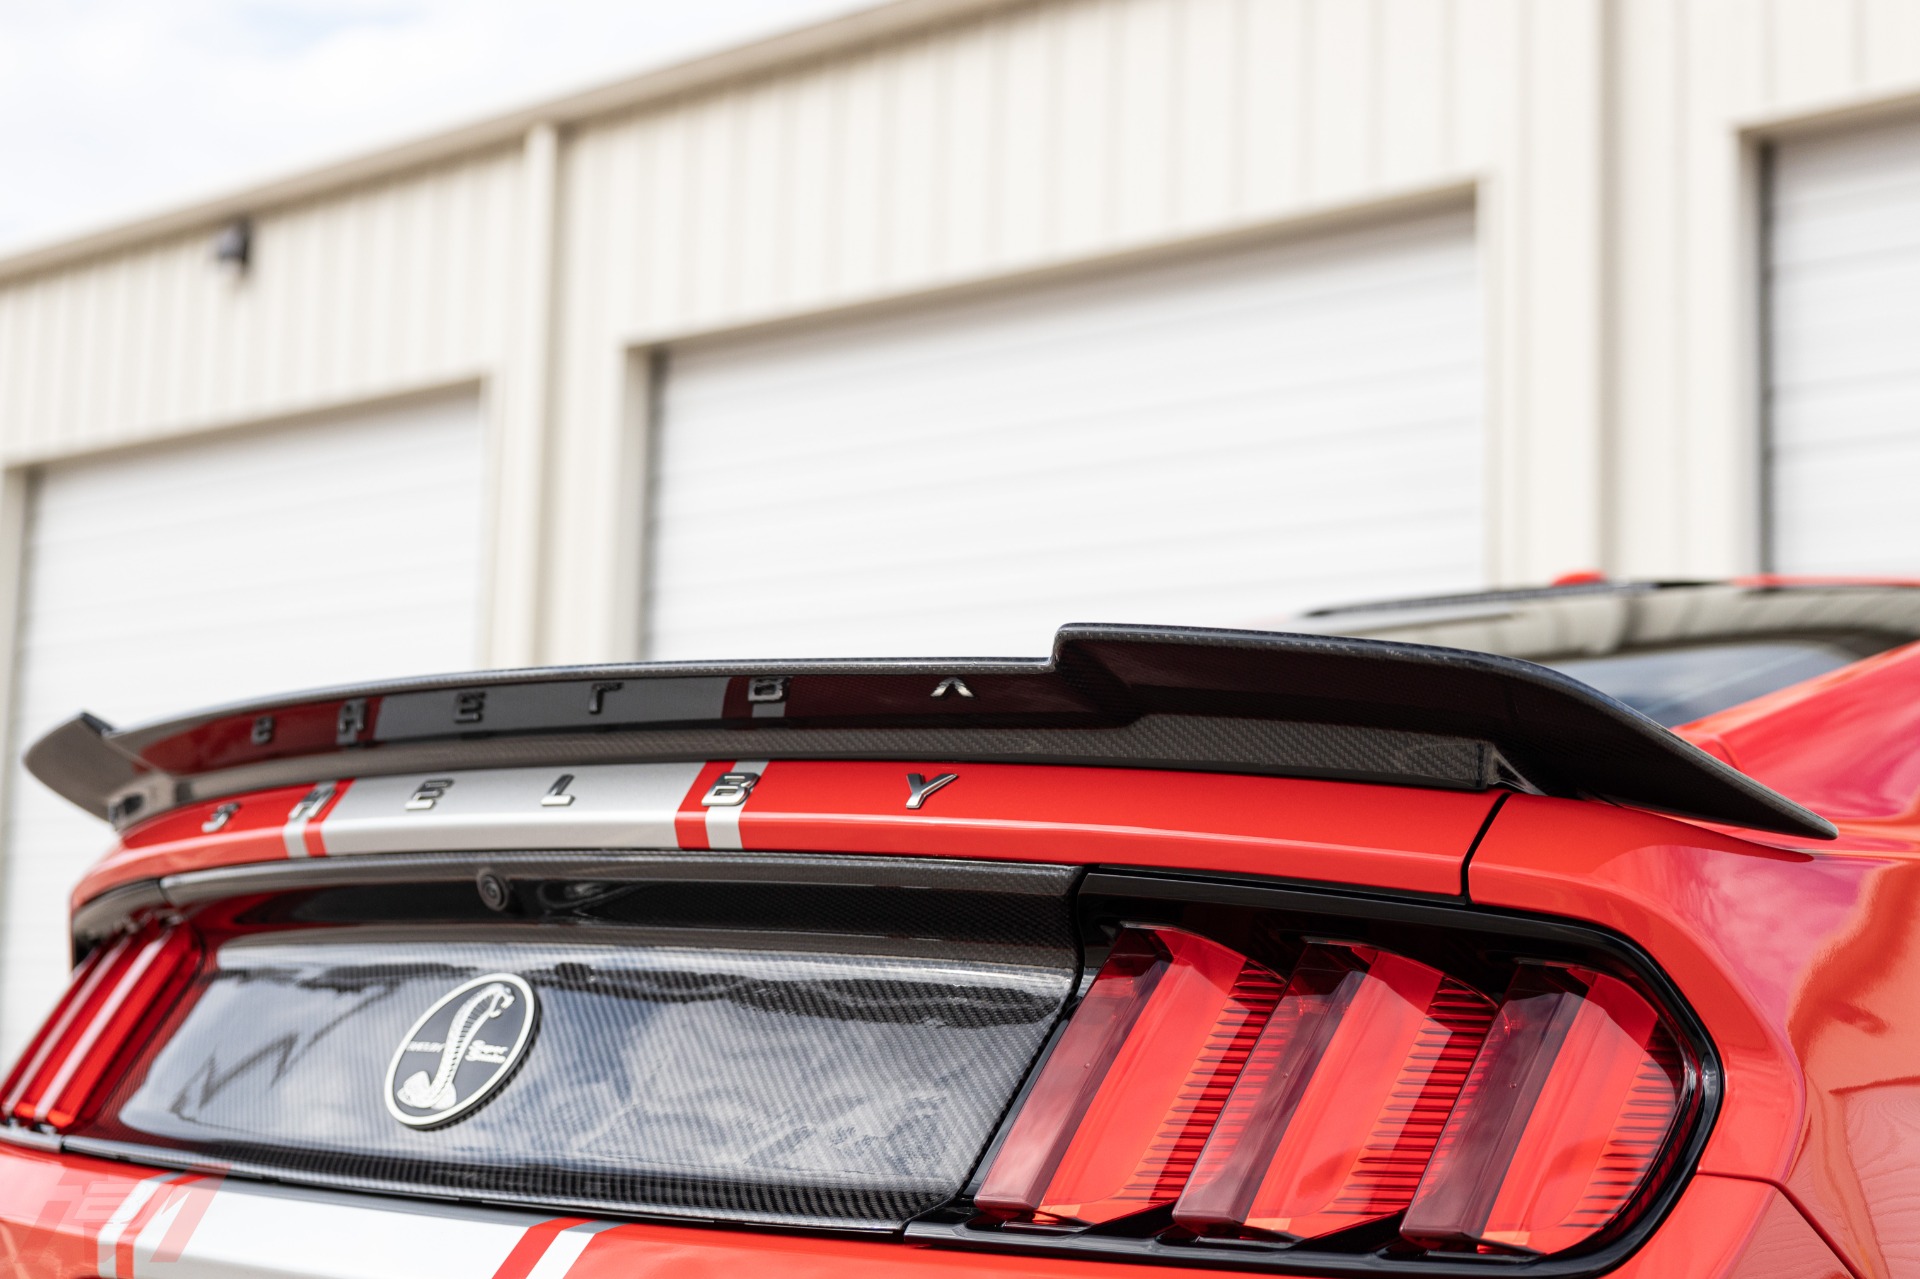 Used-2015-Ford-Mustang-Shelby-Super-Snake